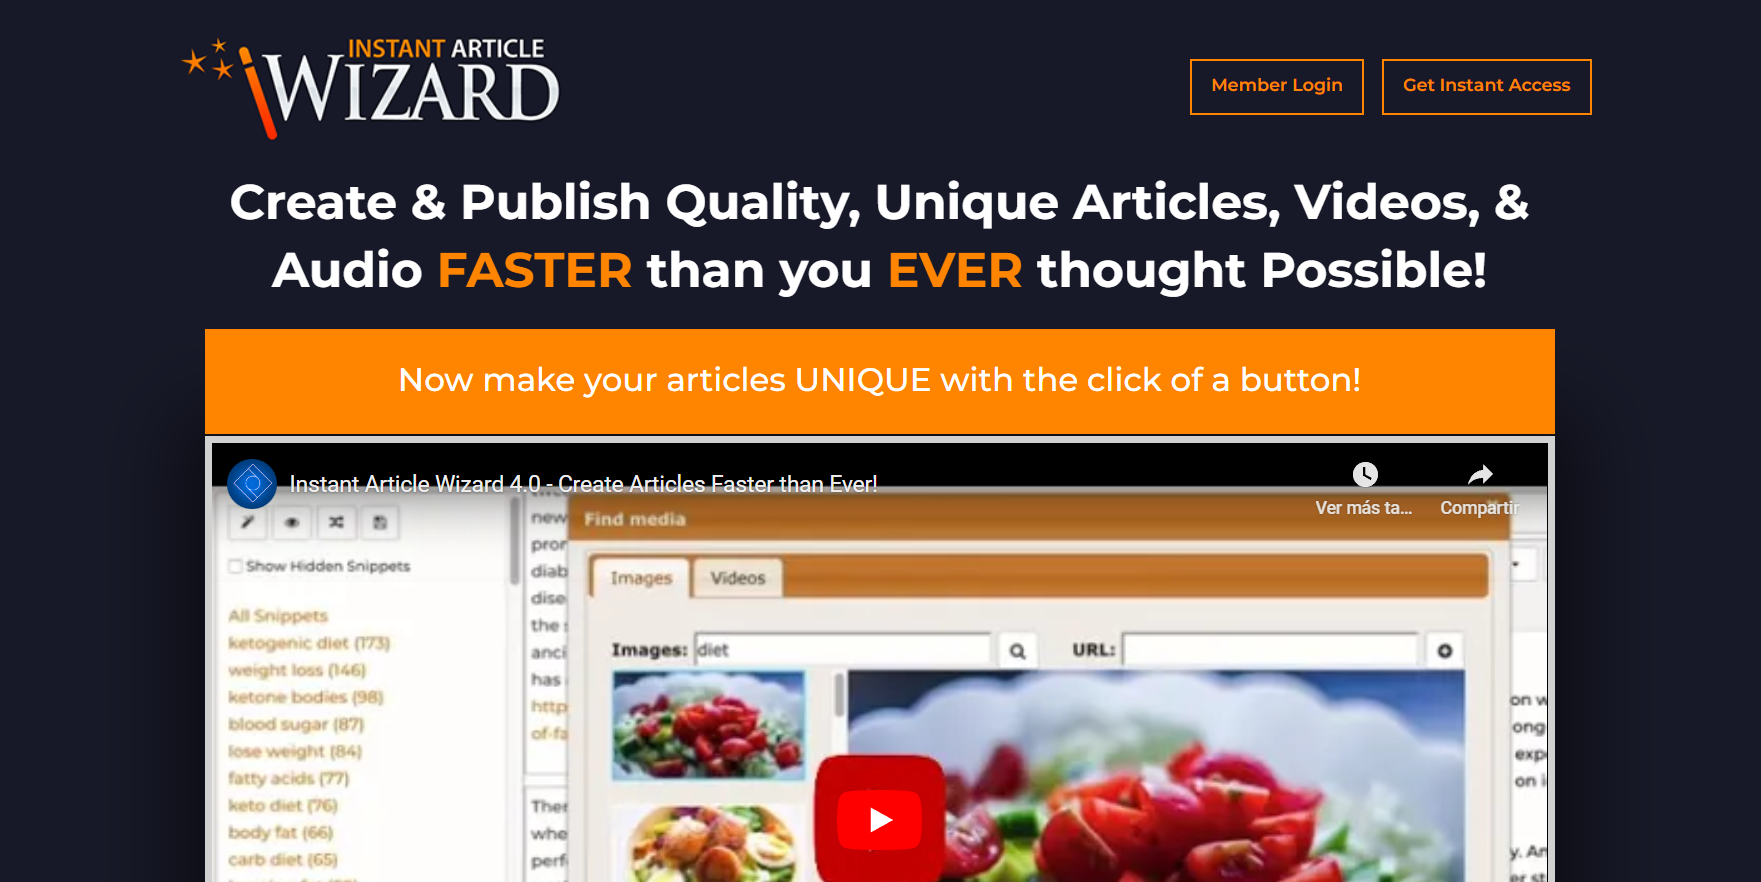 Instant Article Wizard